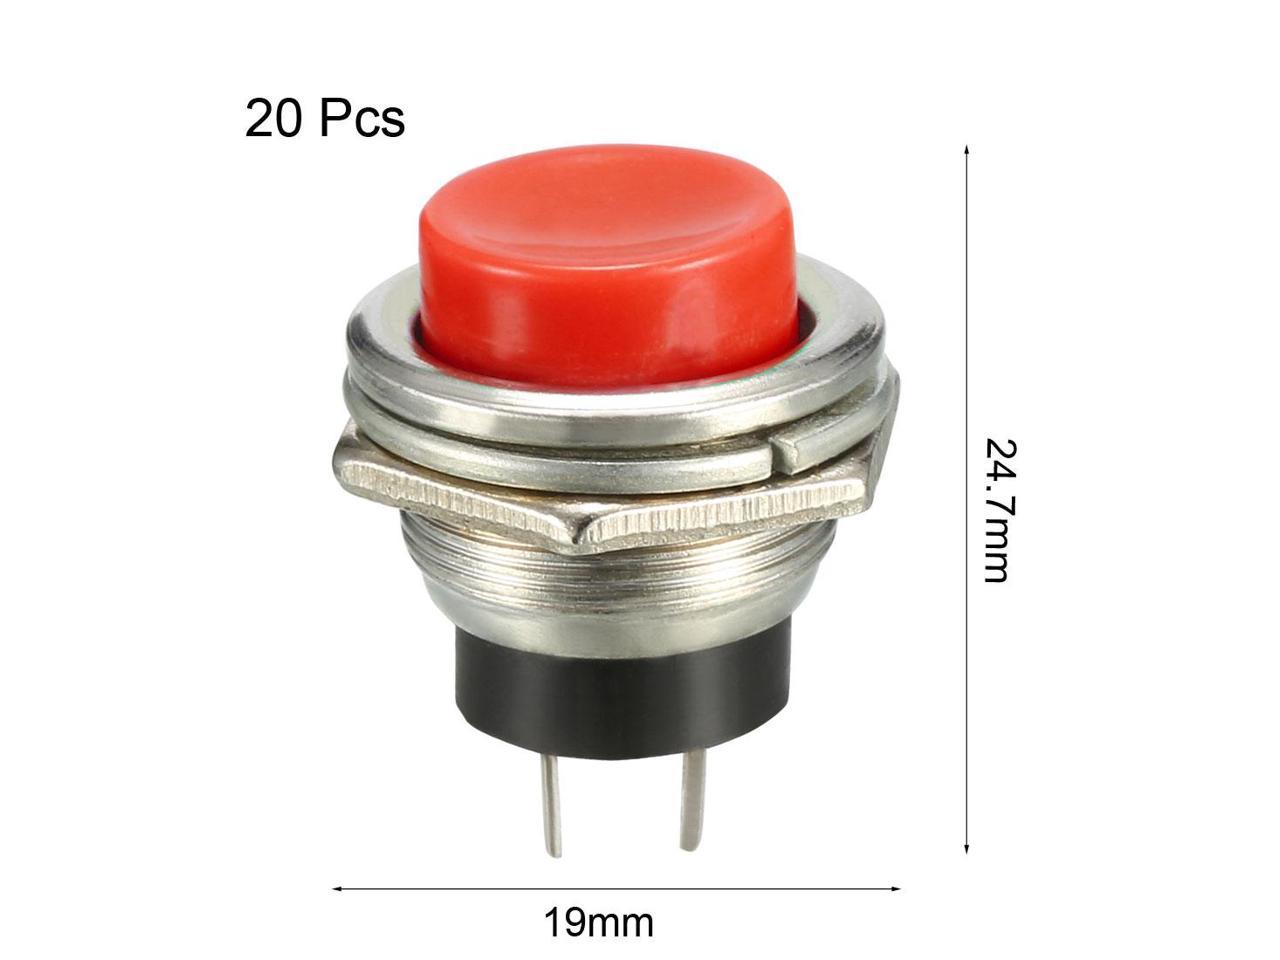 SPST N/O MOMENTARY ON METAL BUTTON PUSH BUTTON SWITCH 10A@125VAC # 66-2432-5PK 